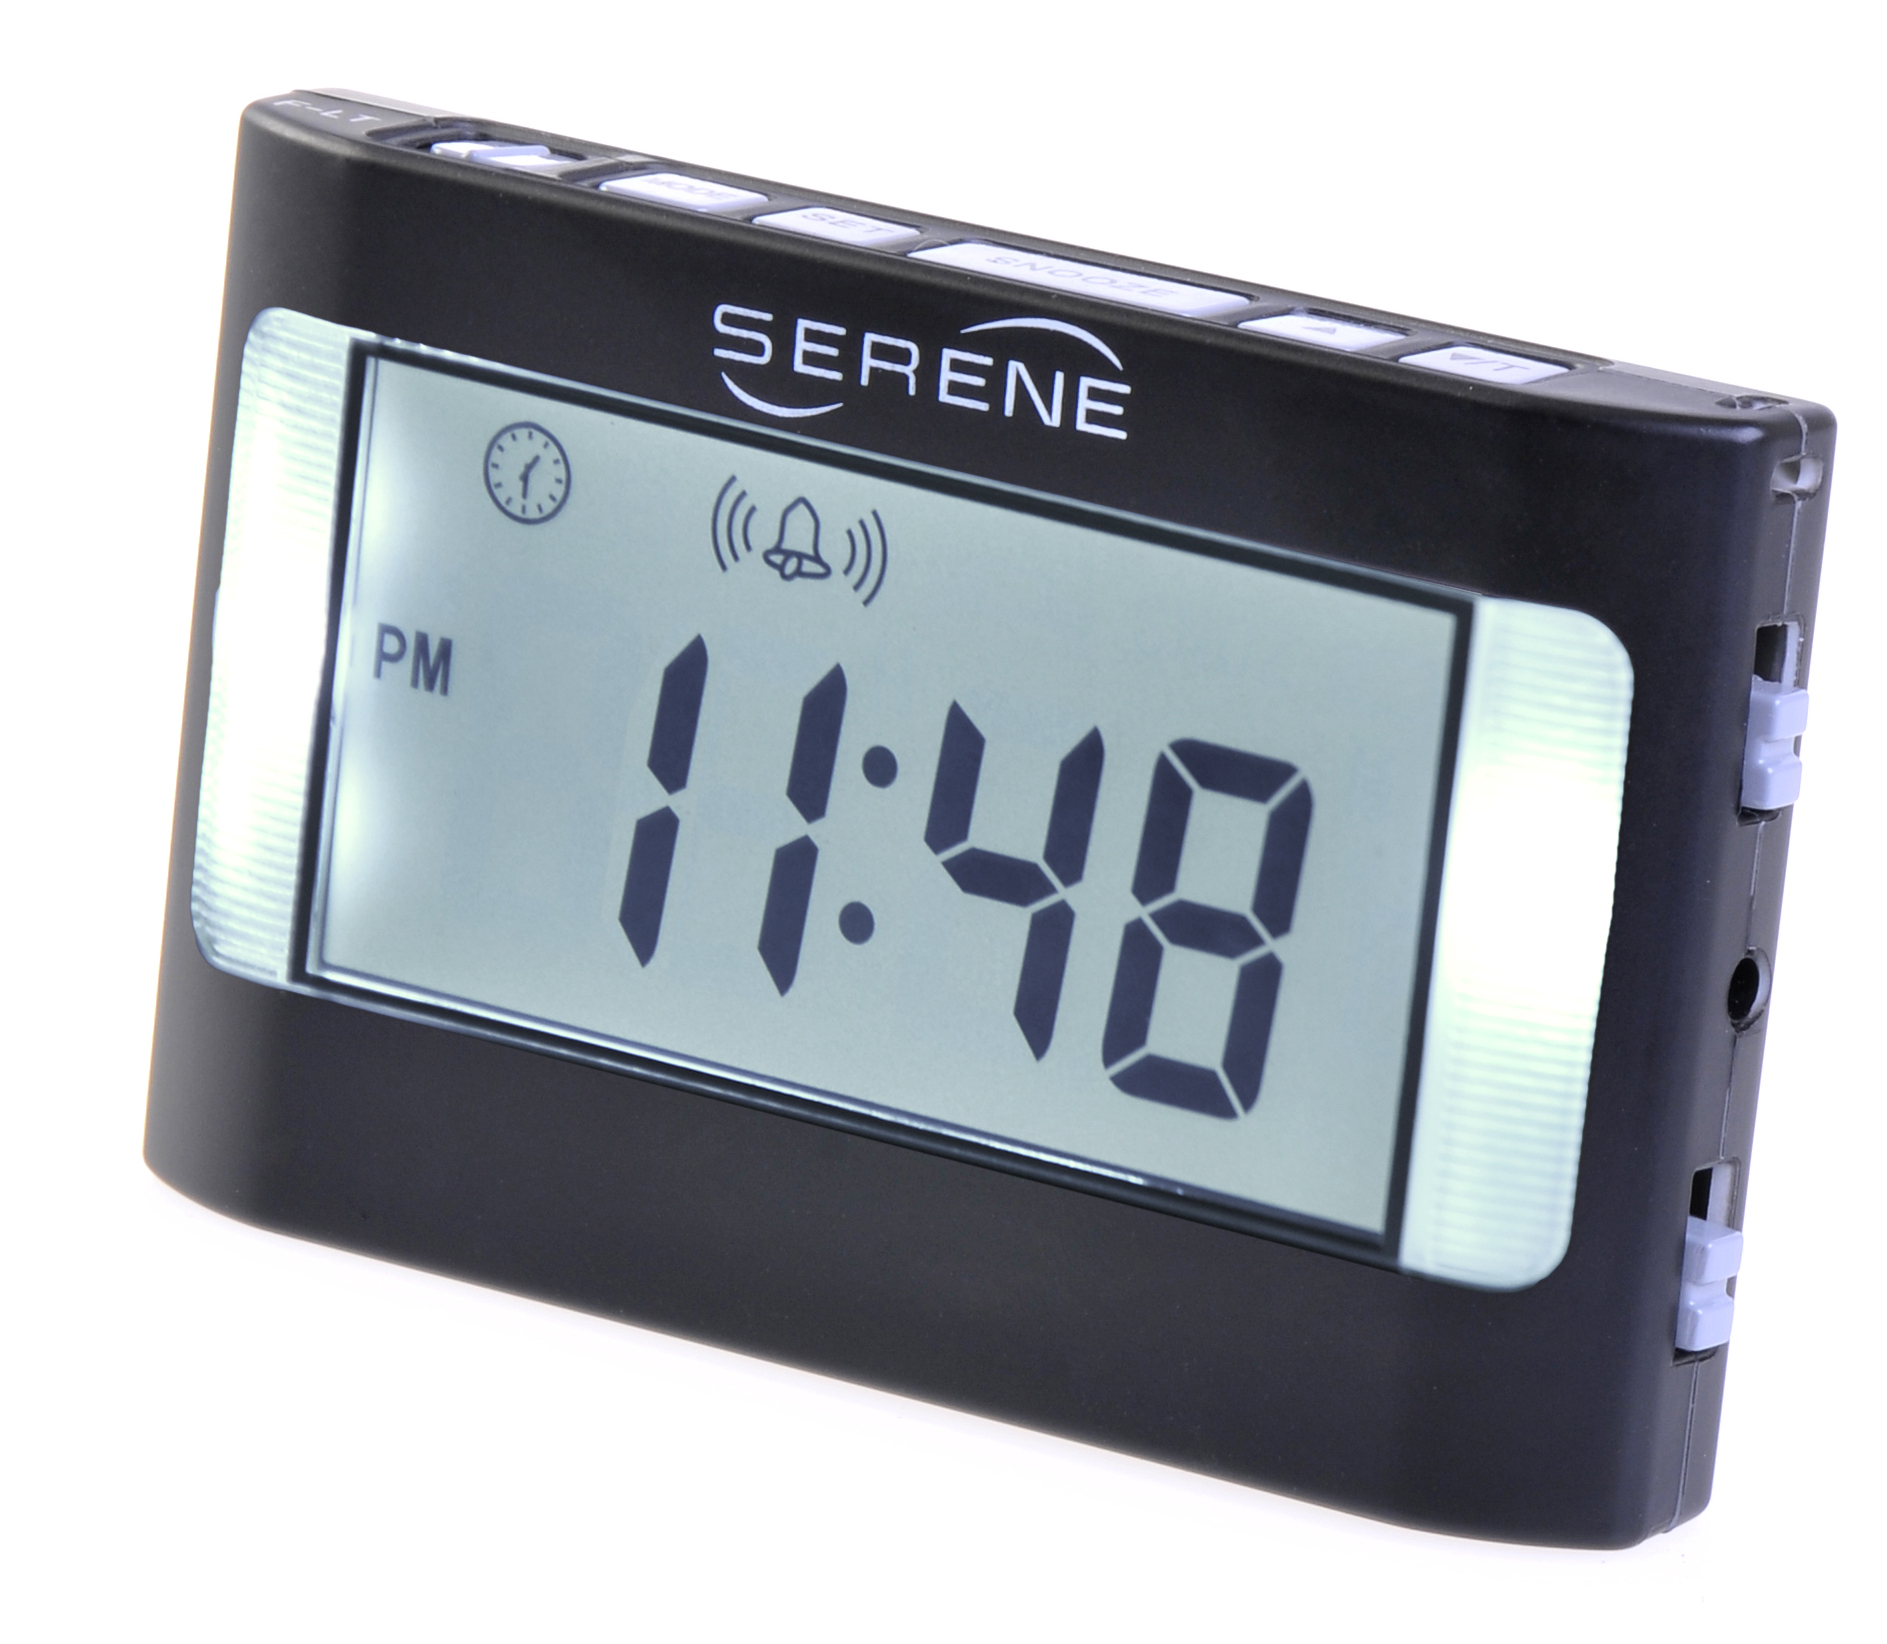 The battery-powered Serene Innovations VA3 Vibrating Travel Alarm Clock wakes with vibration and/or loud alarm.